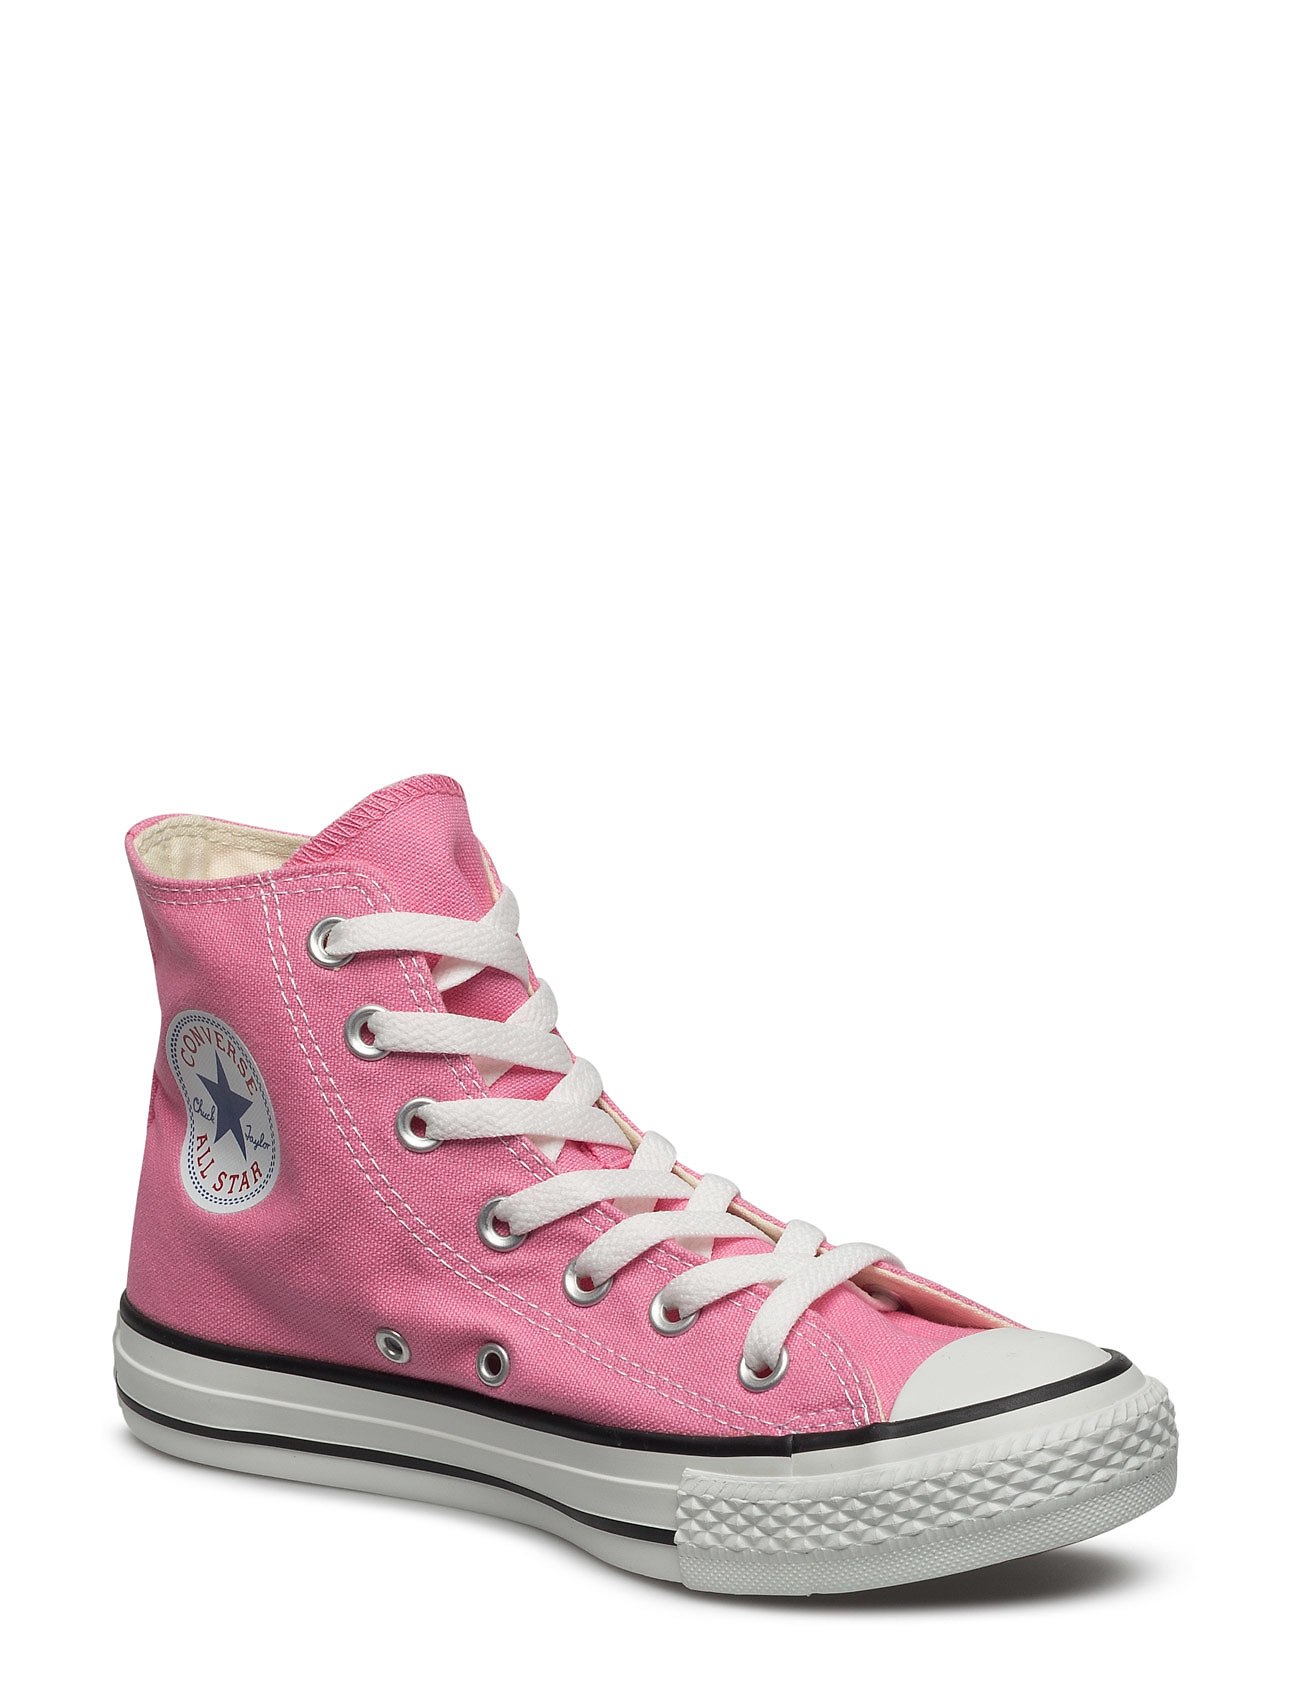 Chuck Taylor All Star Sport Sneakers High-top Sneakers Pink Converse